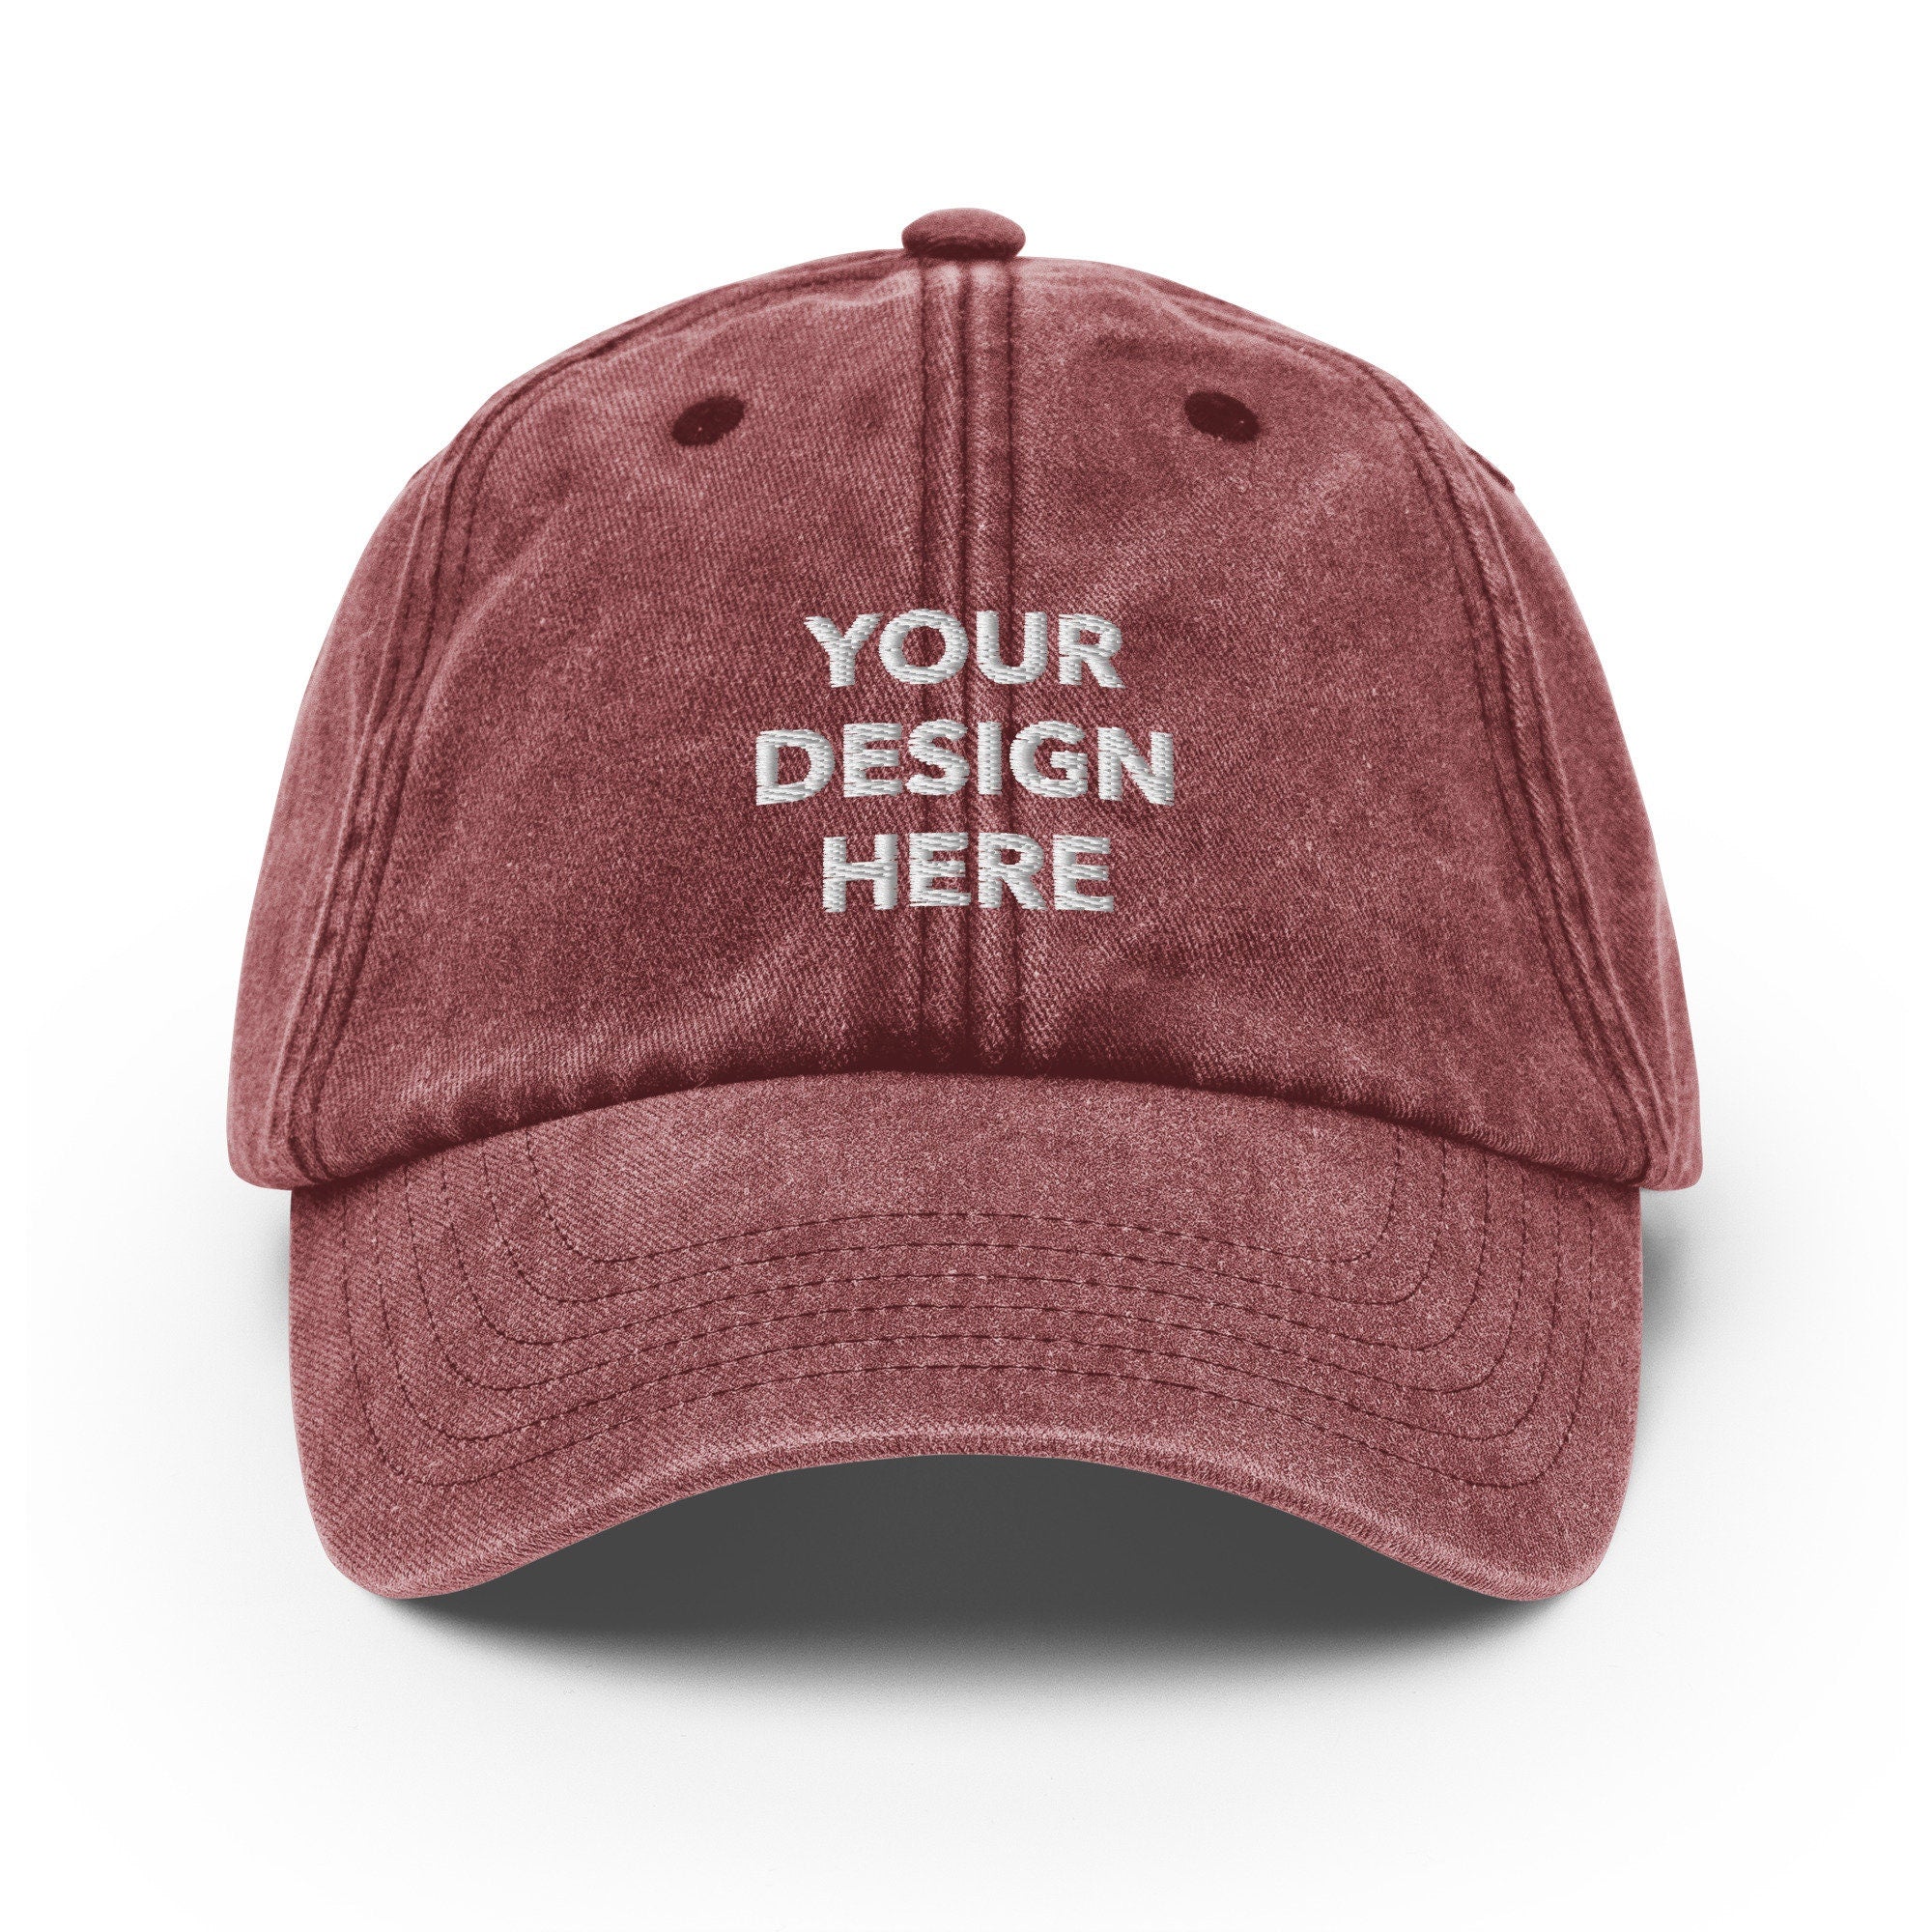 Personalized Embroidered Vintage Hat, Customized Logo Hat, Embroidery With Your Own Text or Design, Handmade Custom Aged Cap